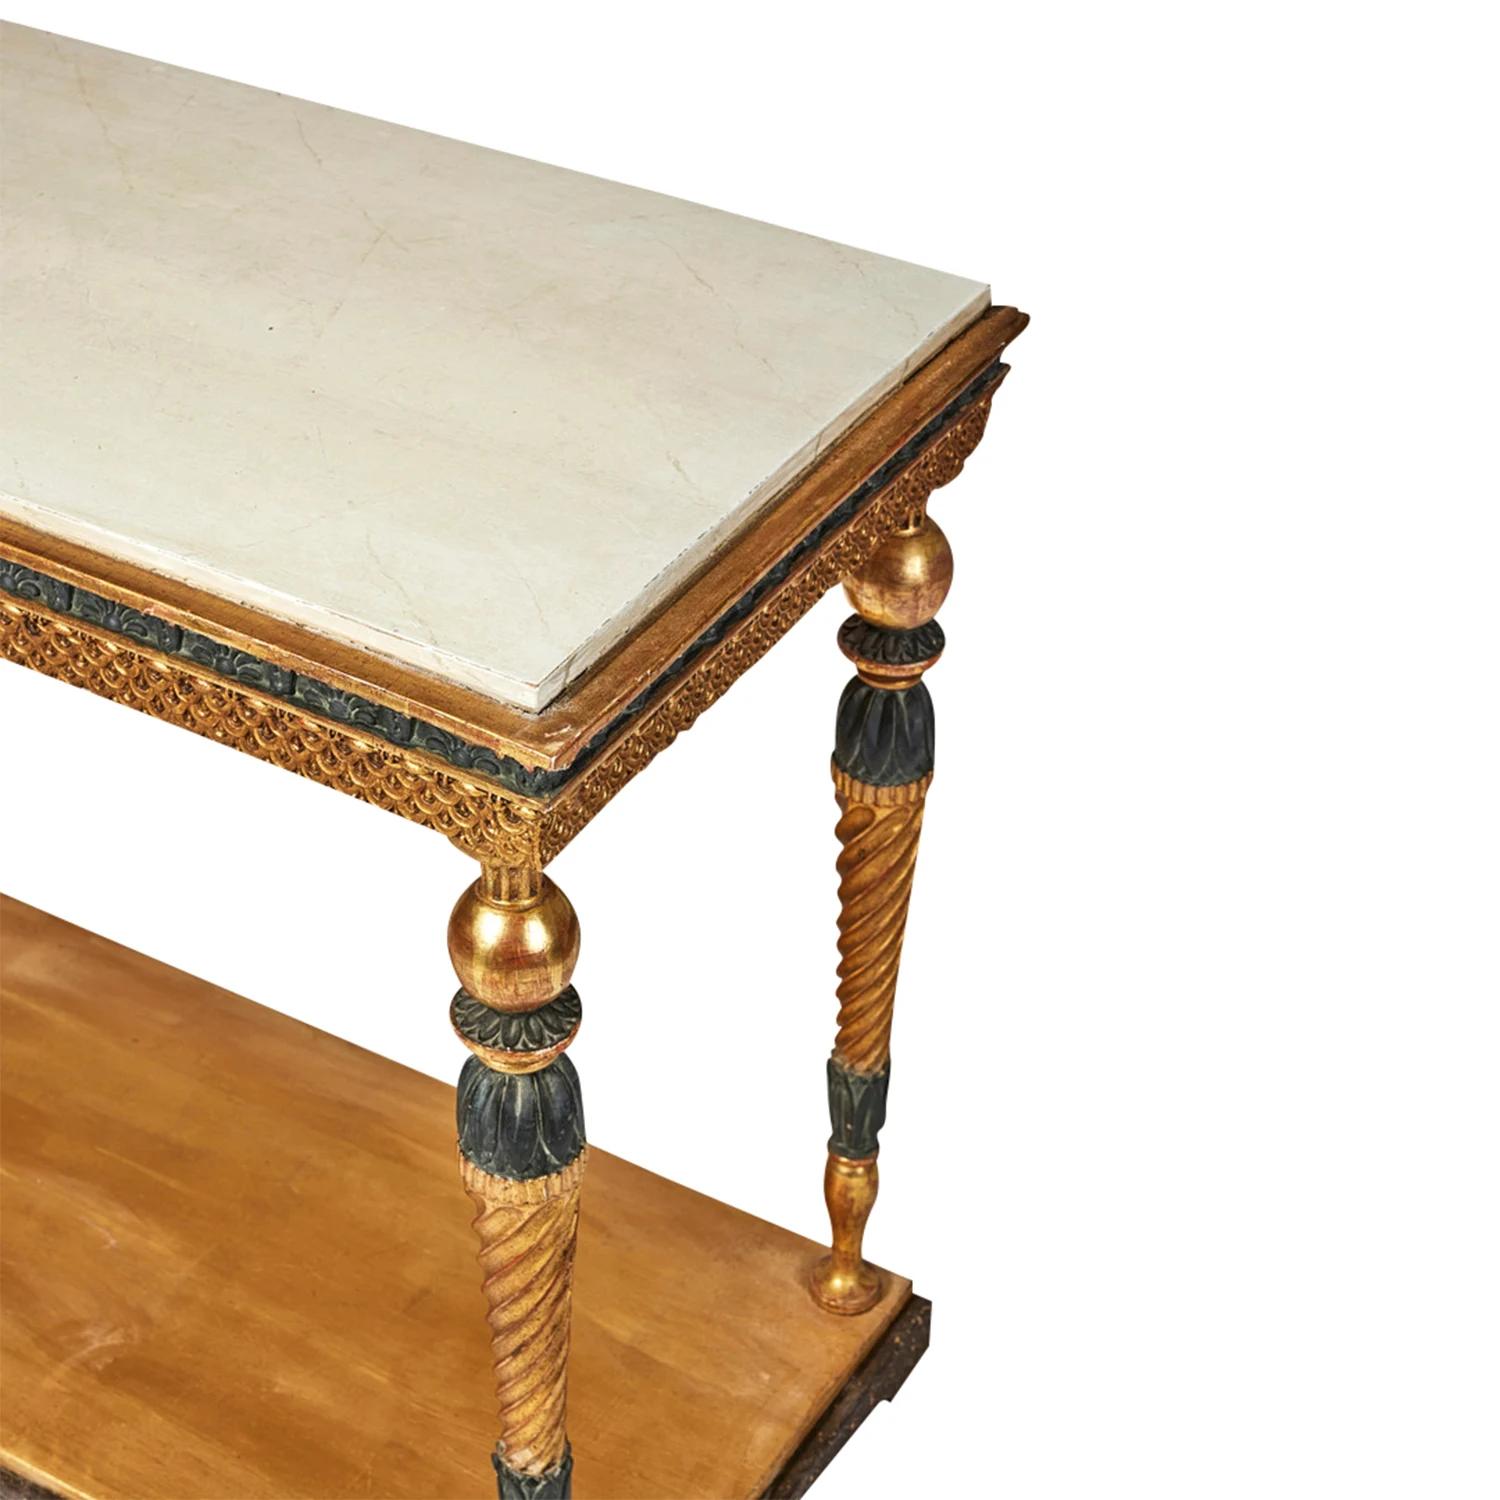 Hand-Painted 19th Century Swedish Gustavian Gilded Pinewood Console Table by Jonas Frisk For Sale